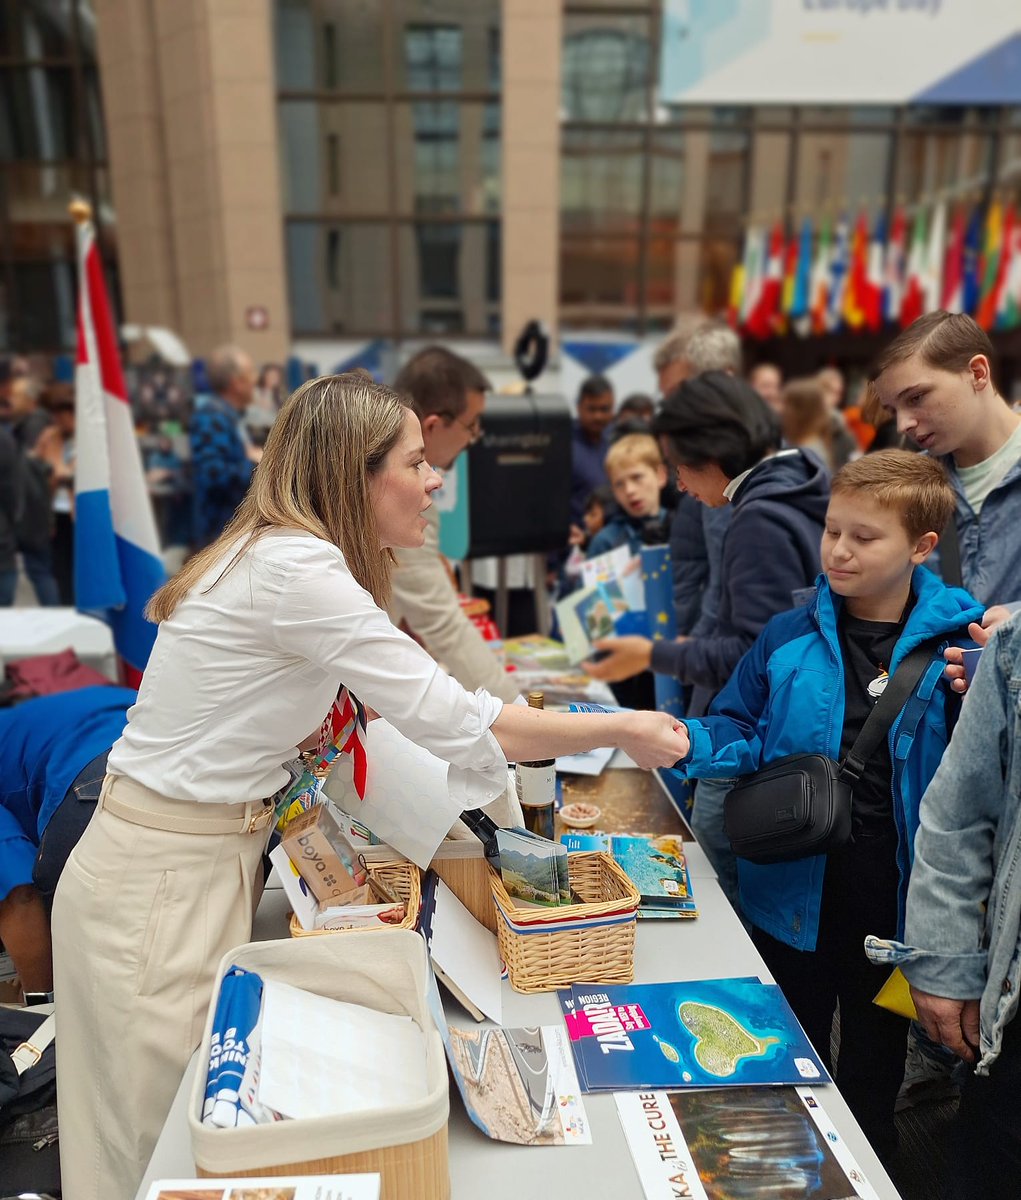 That's a wrap! 👏 It was such a pleasure meeting everyone who stopped by the 🇭🇷 stand at this year's #OpenDay at the @EUCouncil in celebration ahead of #EuropeDay. 🇪🇺 And many thanks to our lovely volunteers! 🫶 See you next year! 👋👋